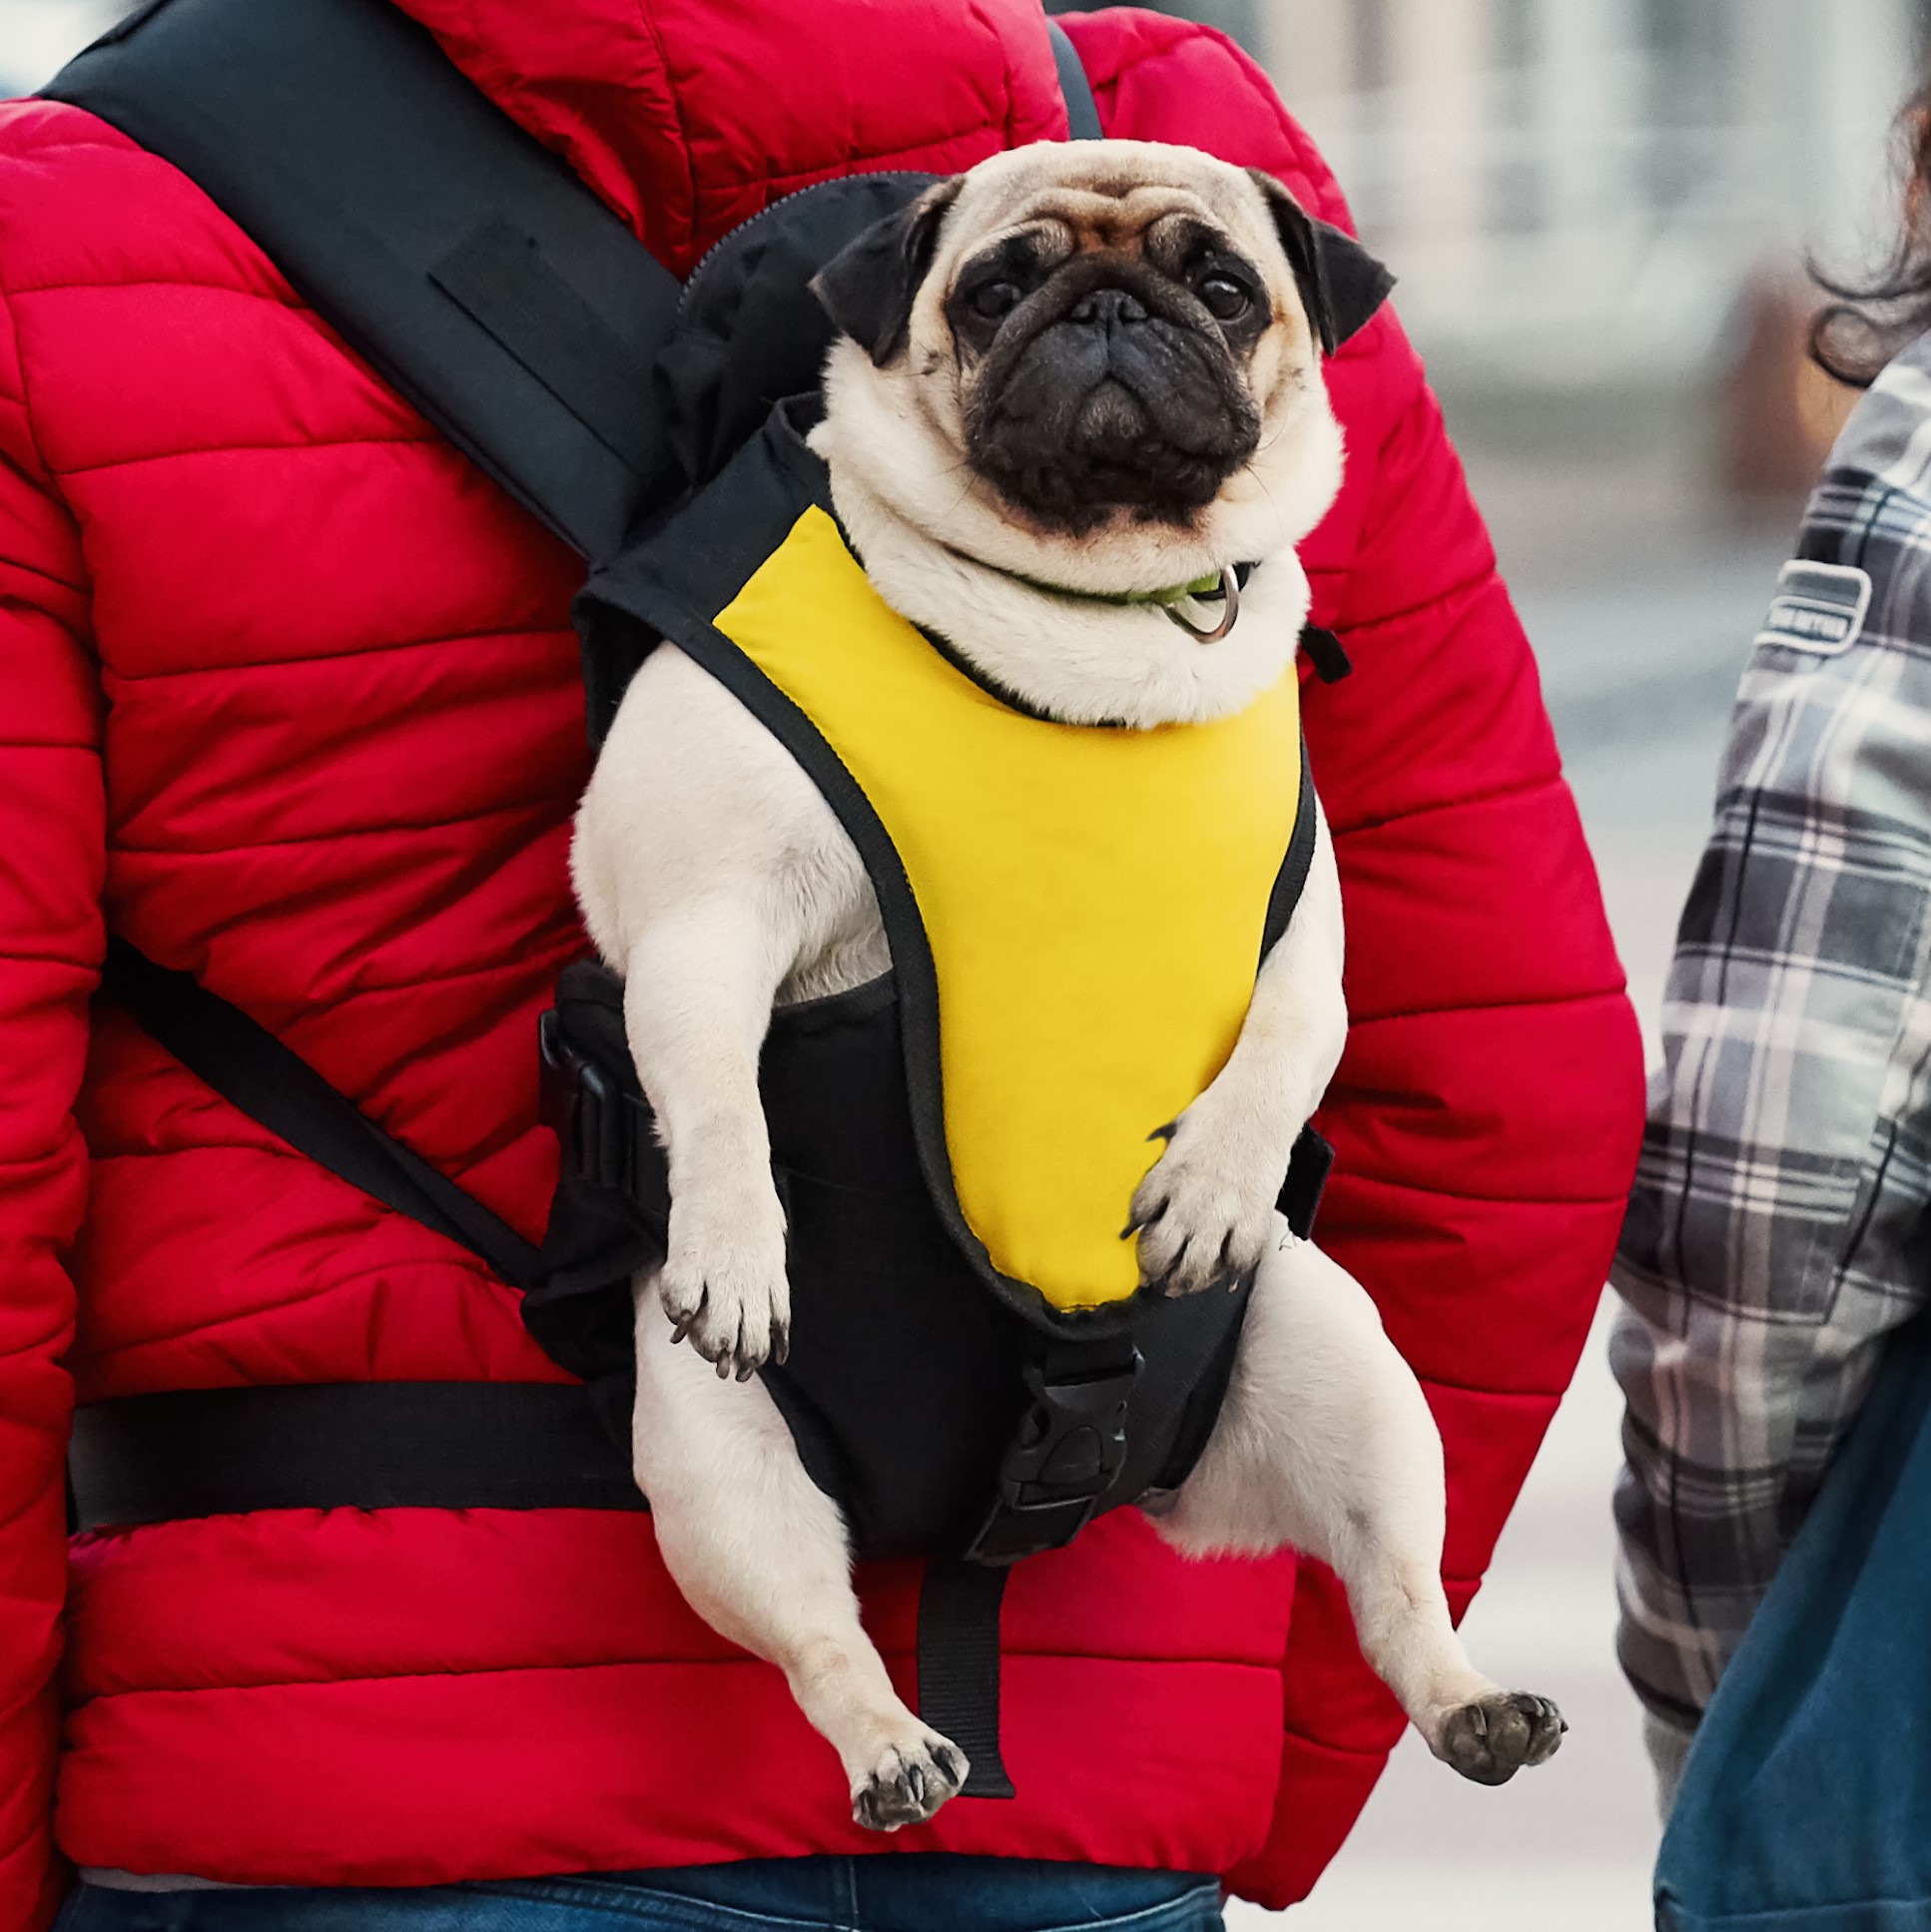 Pug in a sling, baby carrier for cute dog